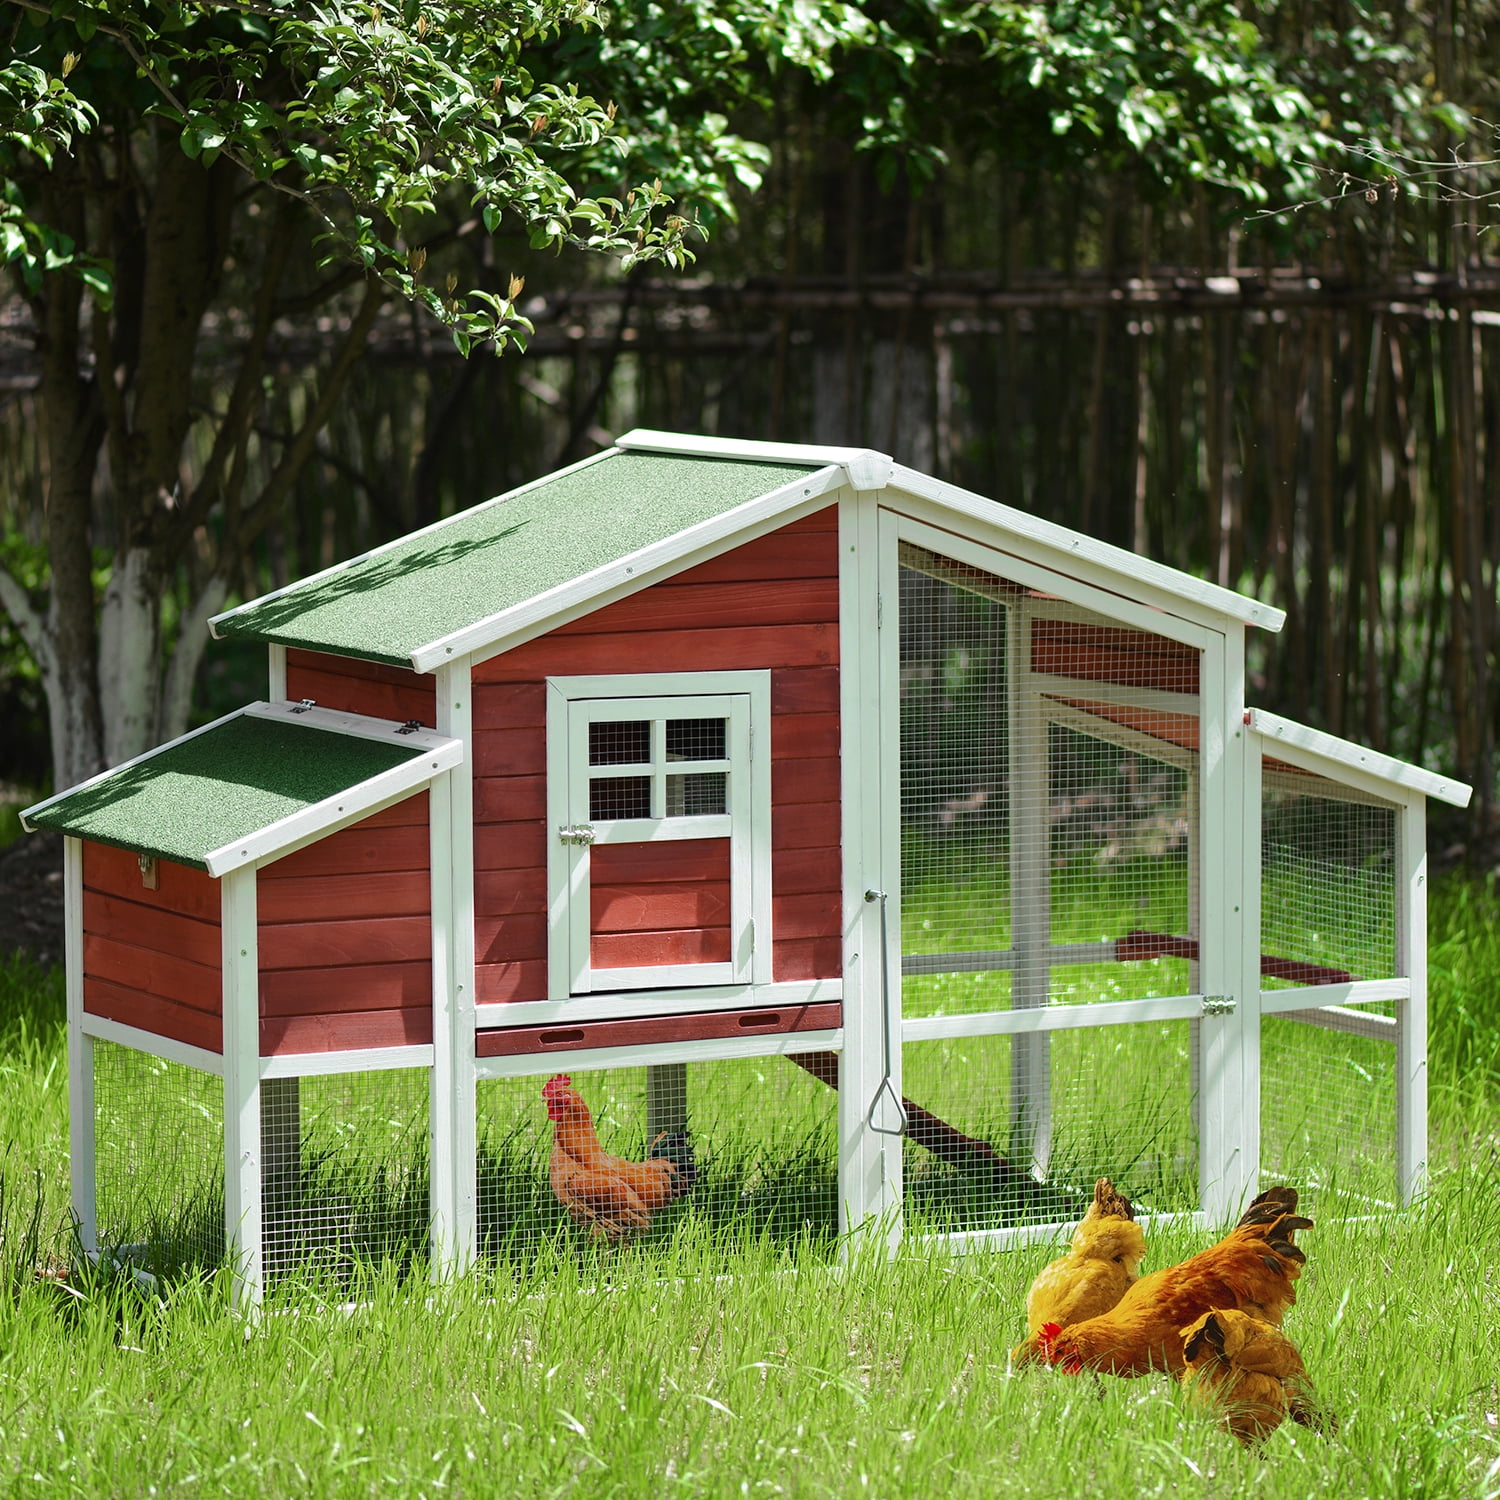 Wooden Backyard Small Animal Hutch Cage Chicken Coop Outdoor Garden Waterproof Roof Poultry House 